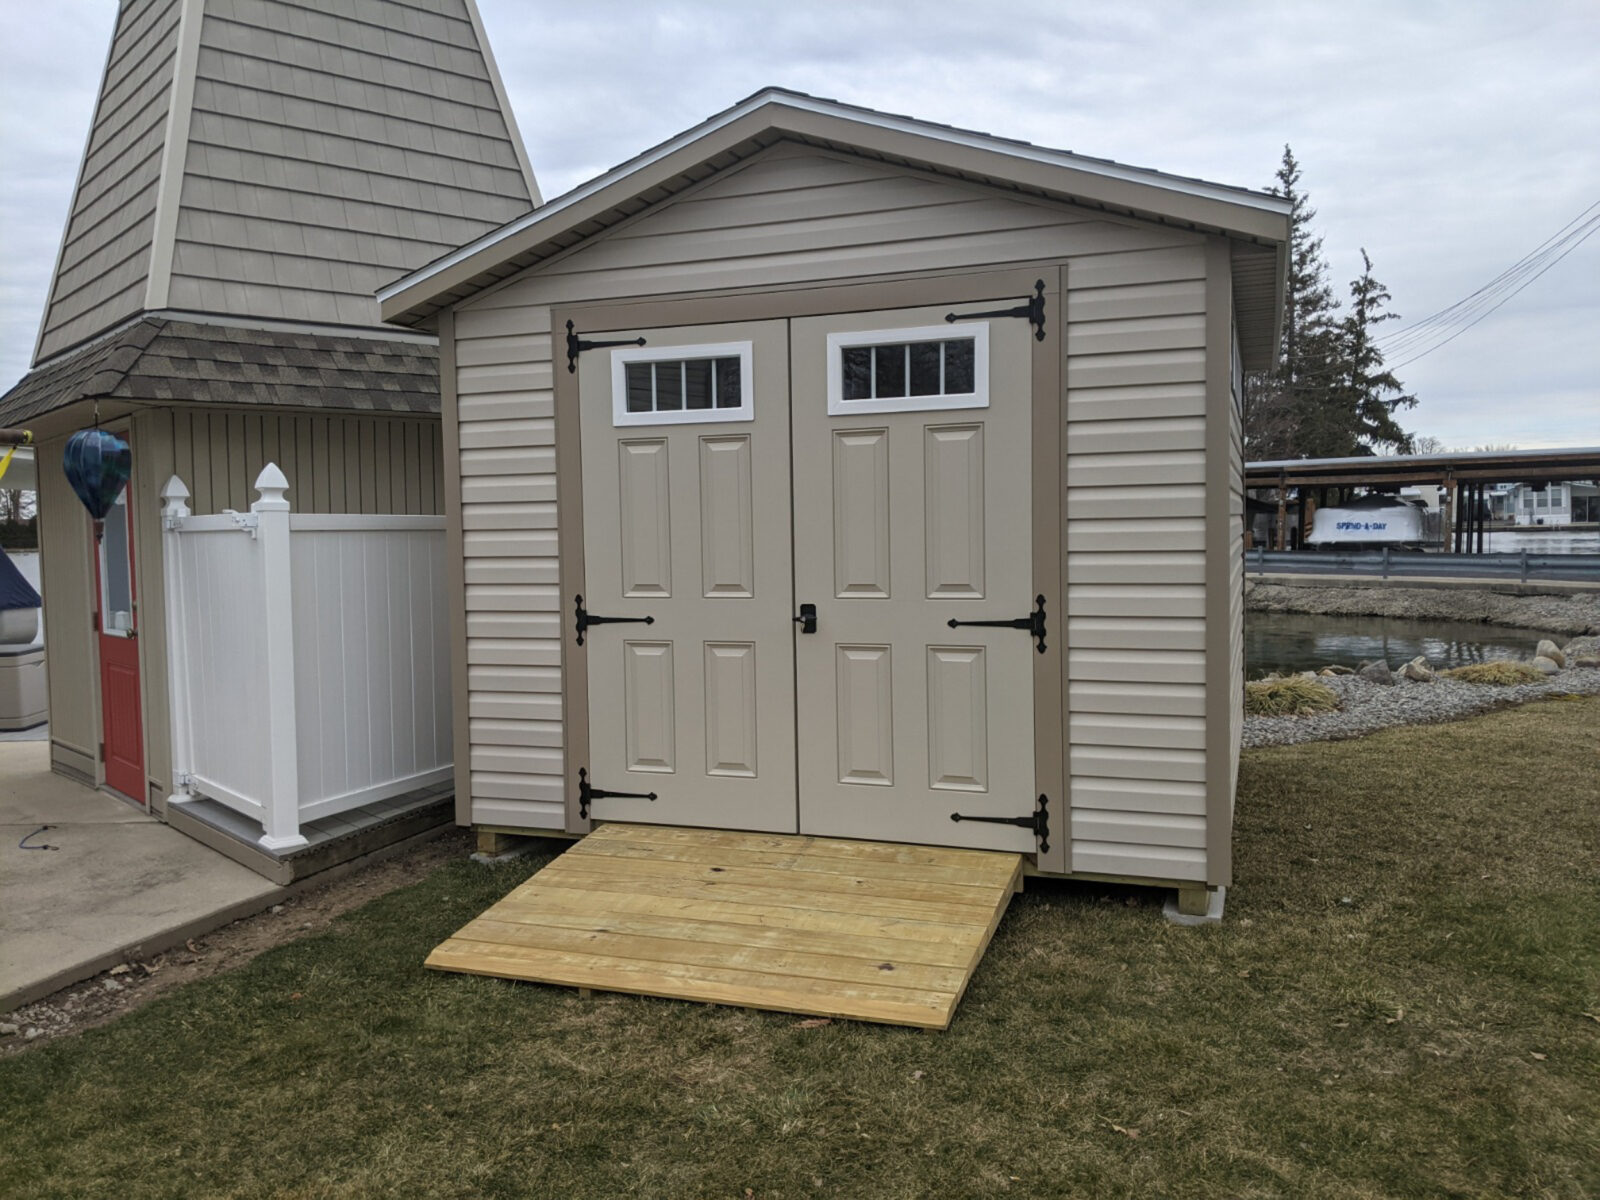 sheds with vinyl siding for sale in dayton oh